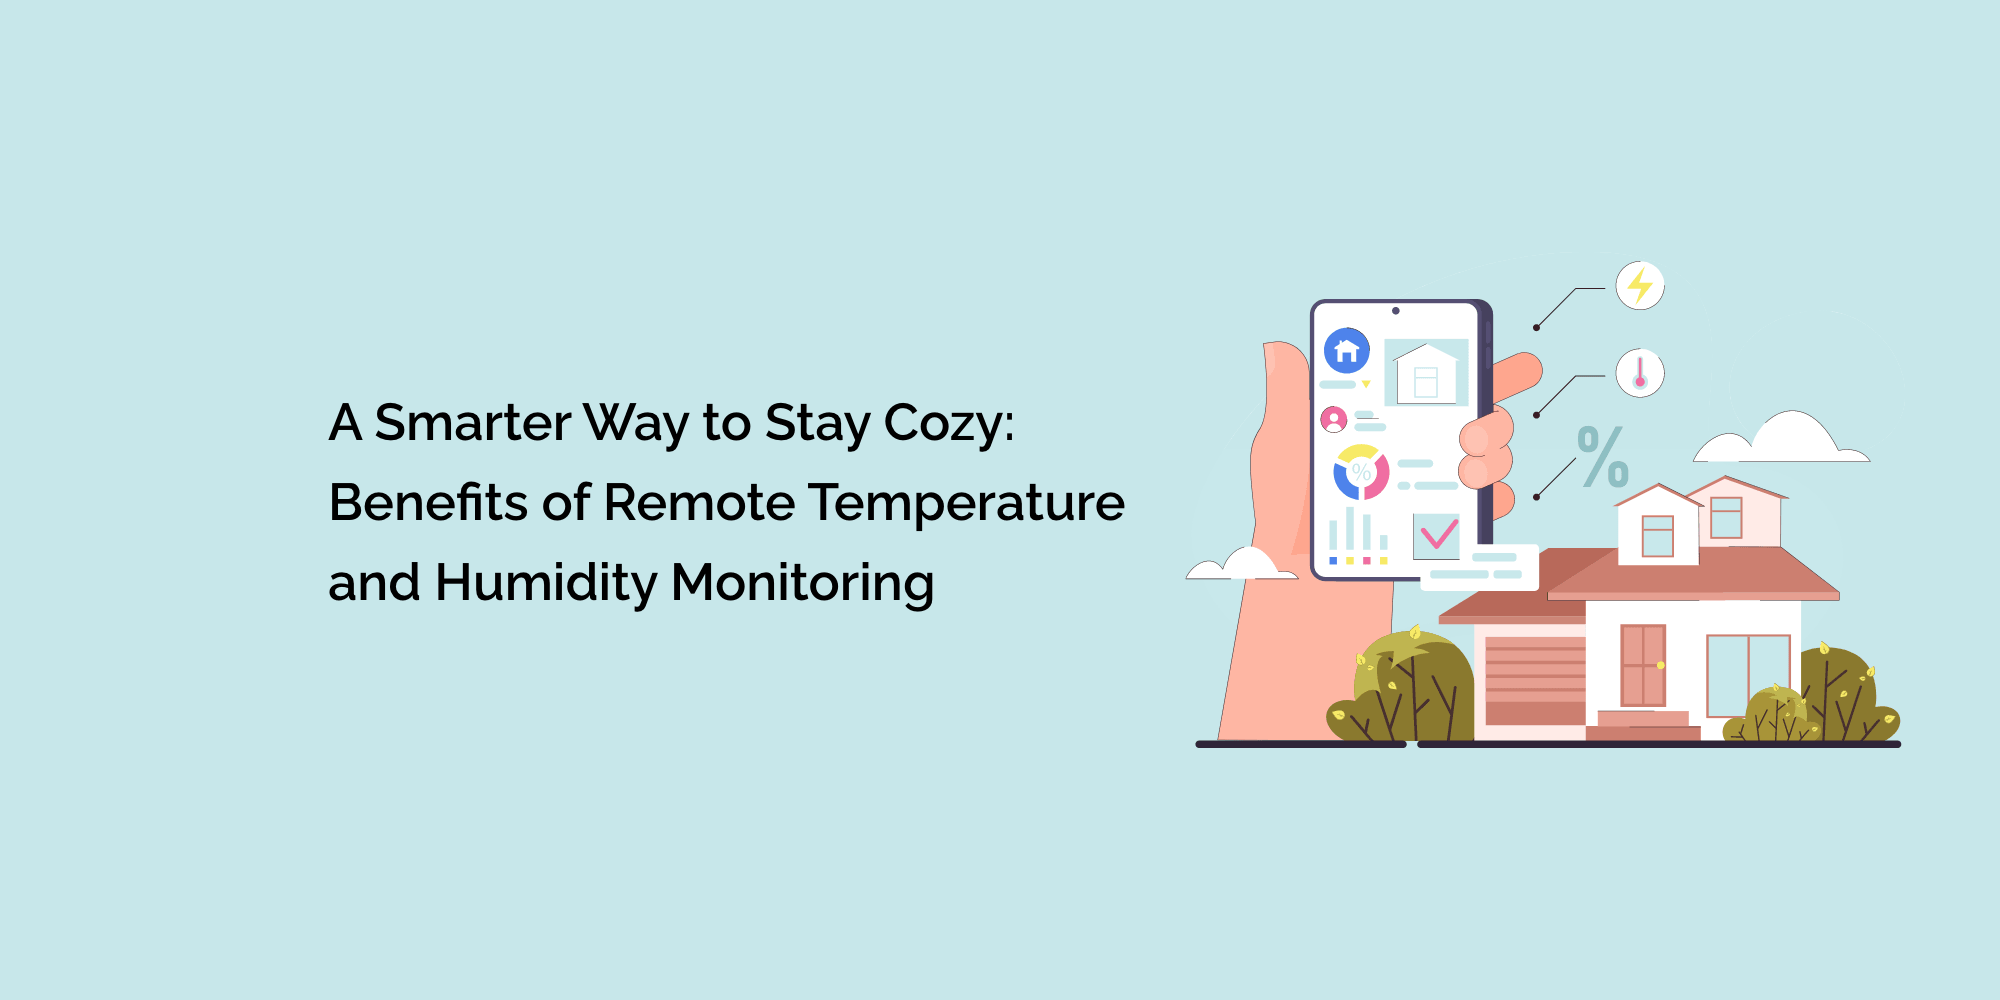 A Smarter Way to Stay Cozy: Benefits of Remote Temperature and Humidity Monitoring